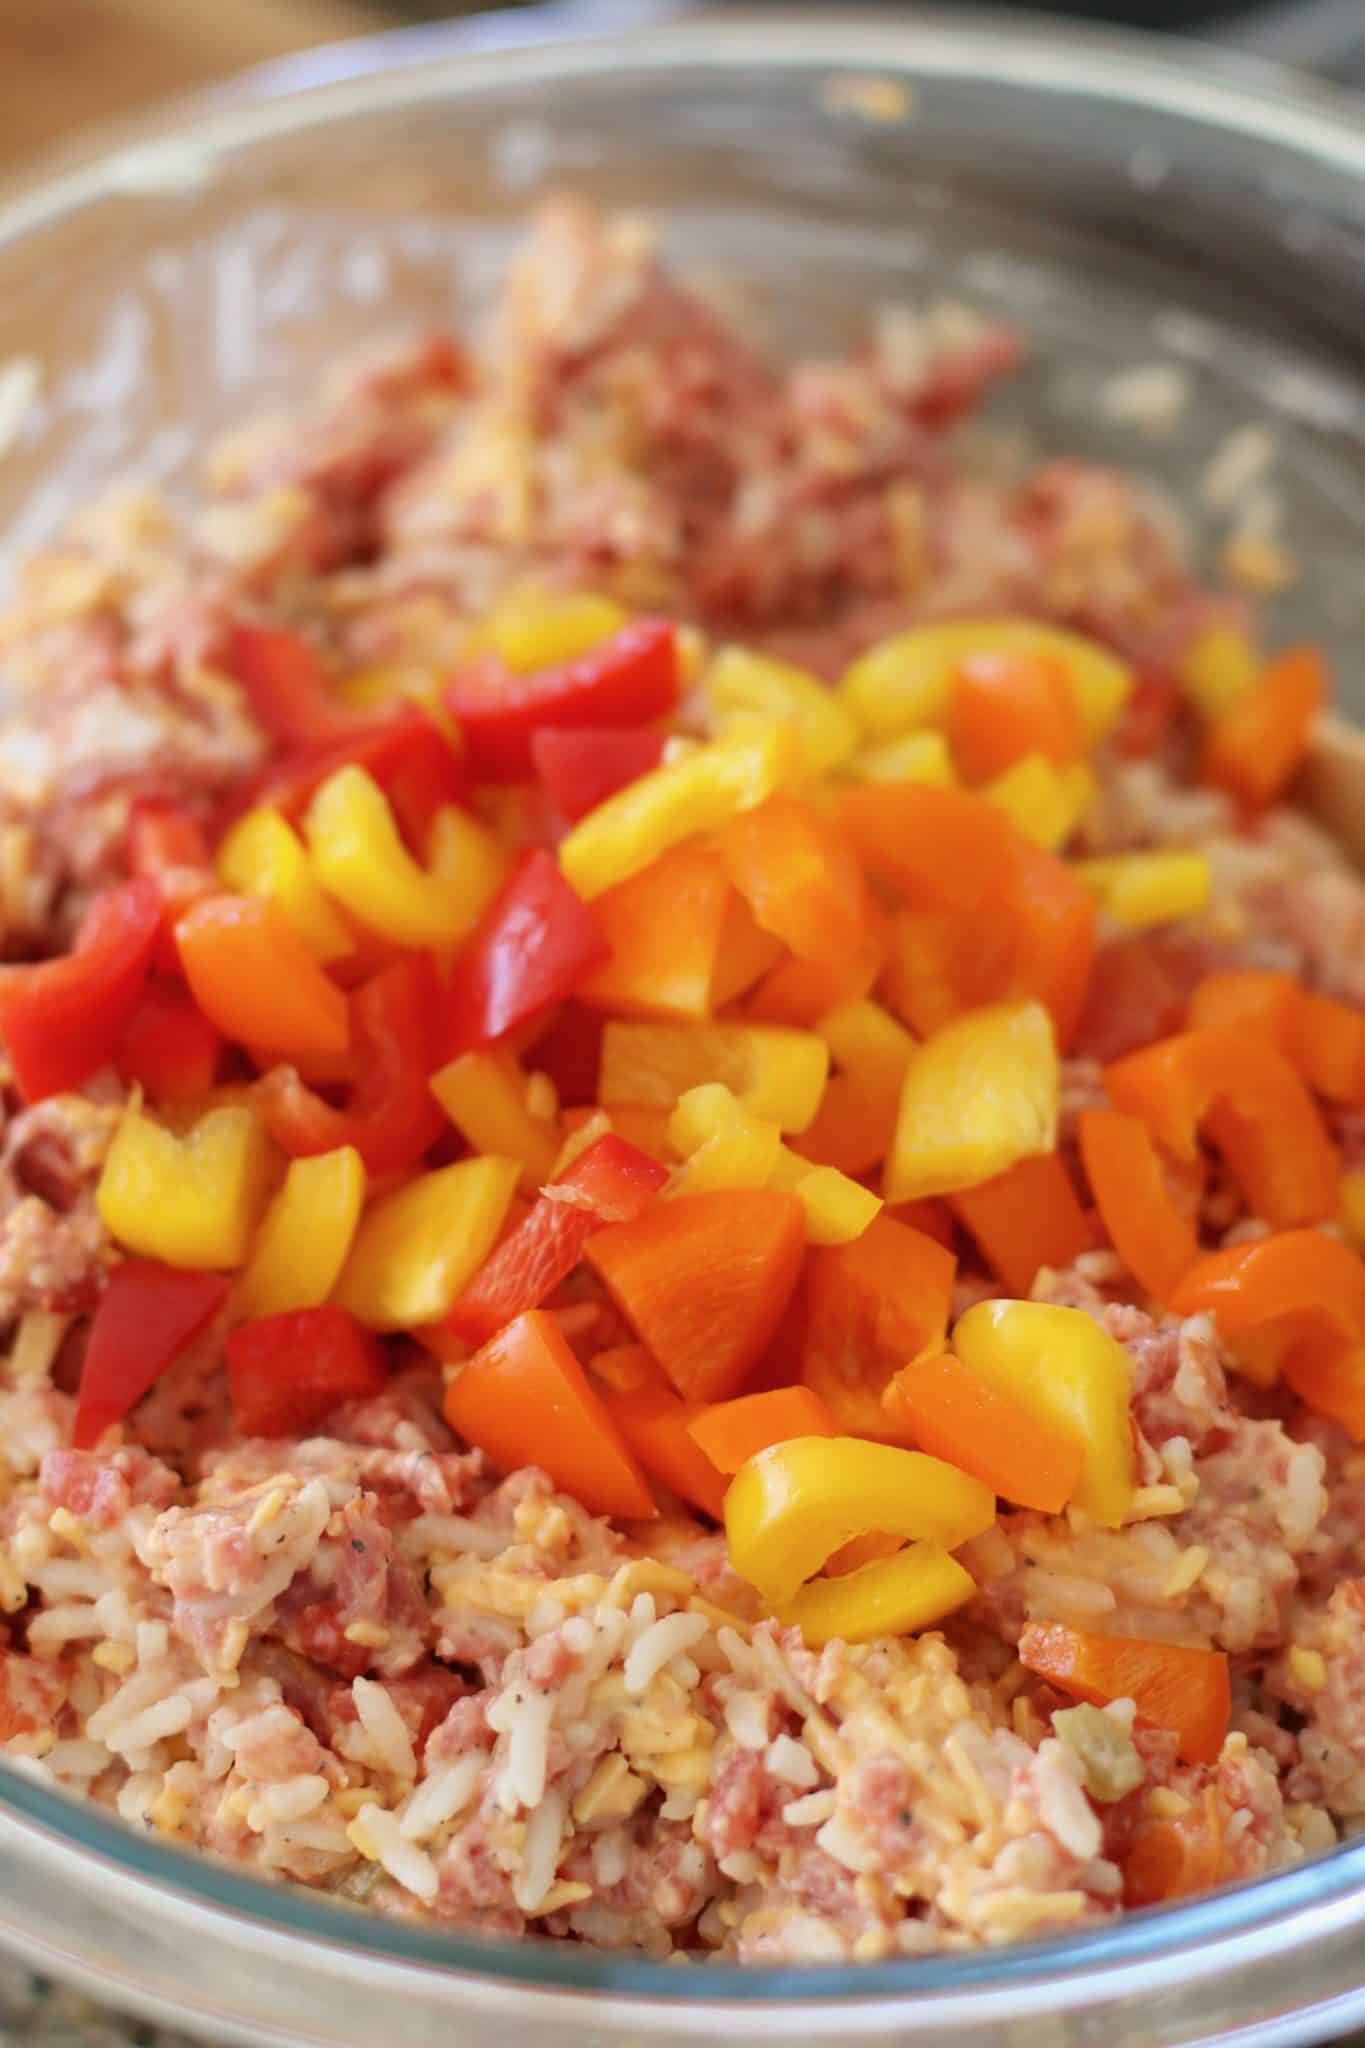 diced bell peppers added to ground beef rice filling